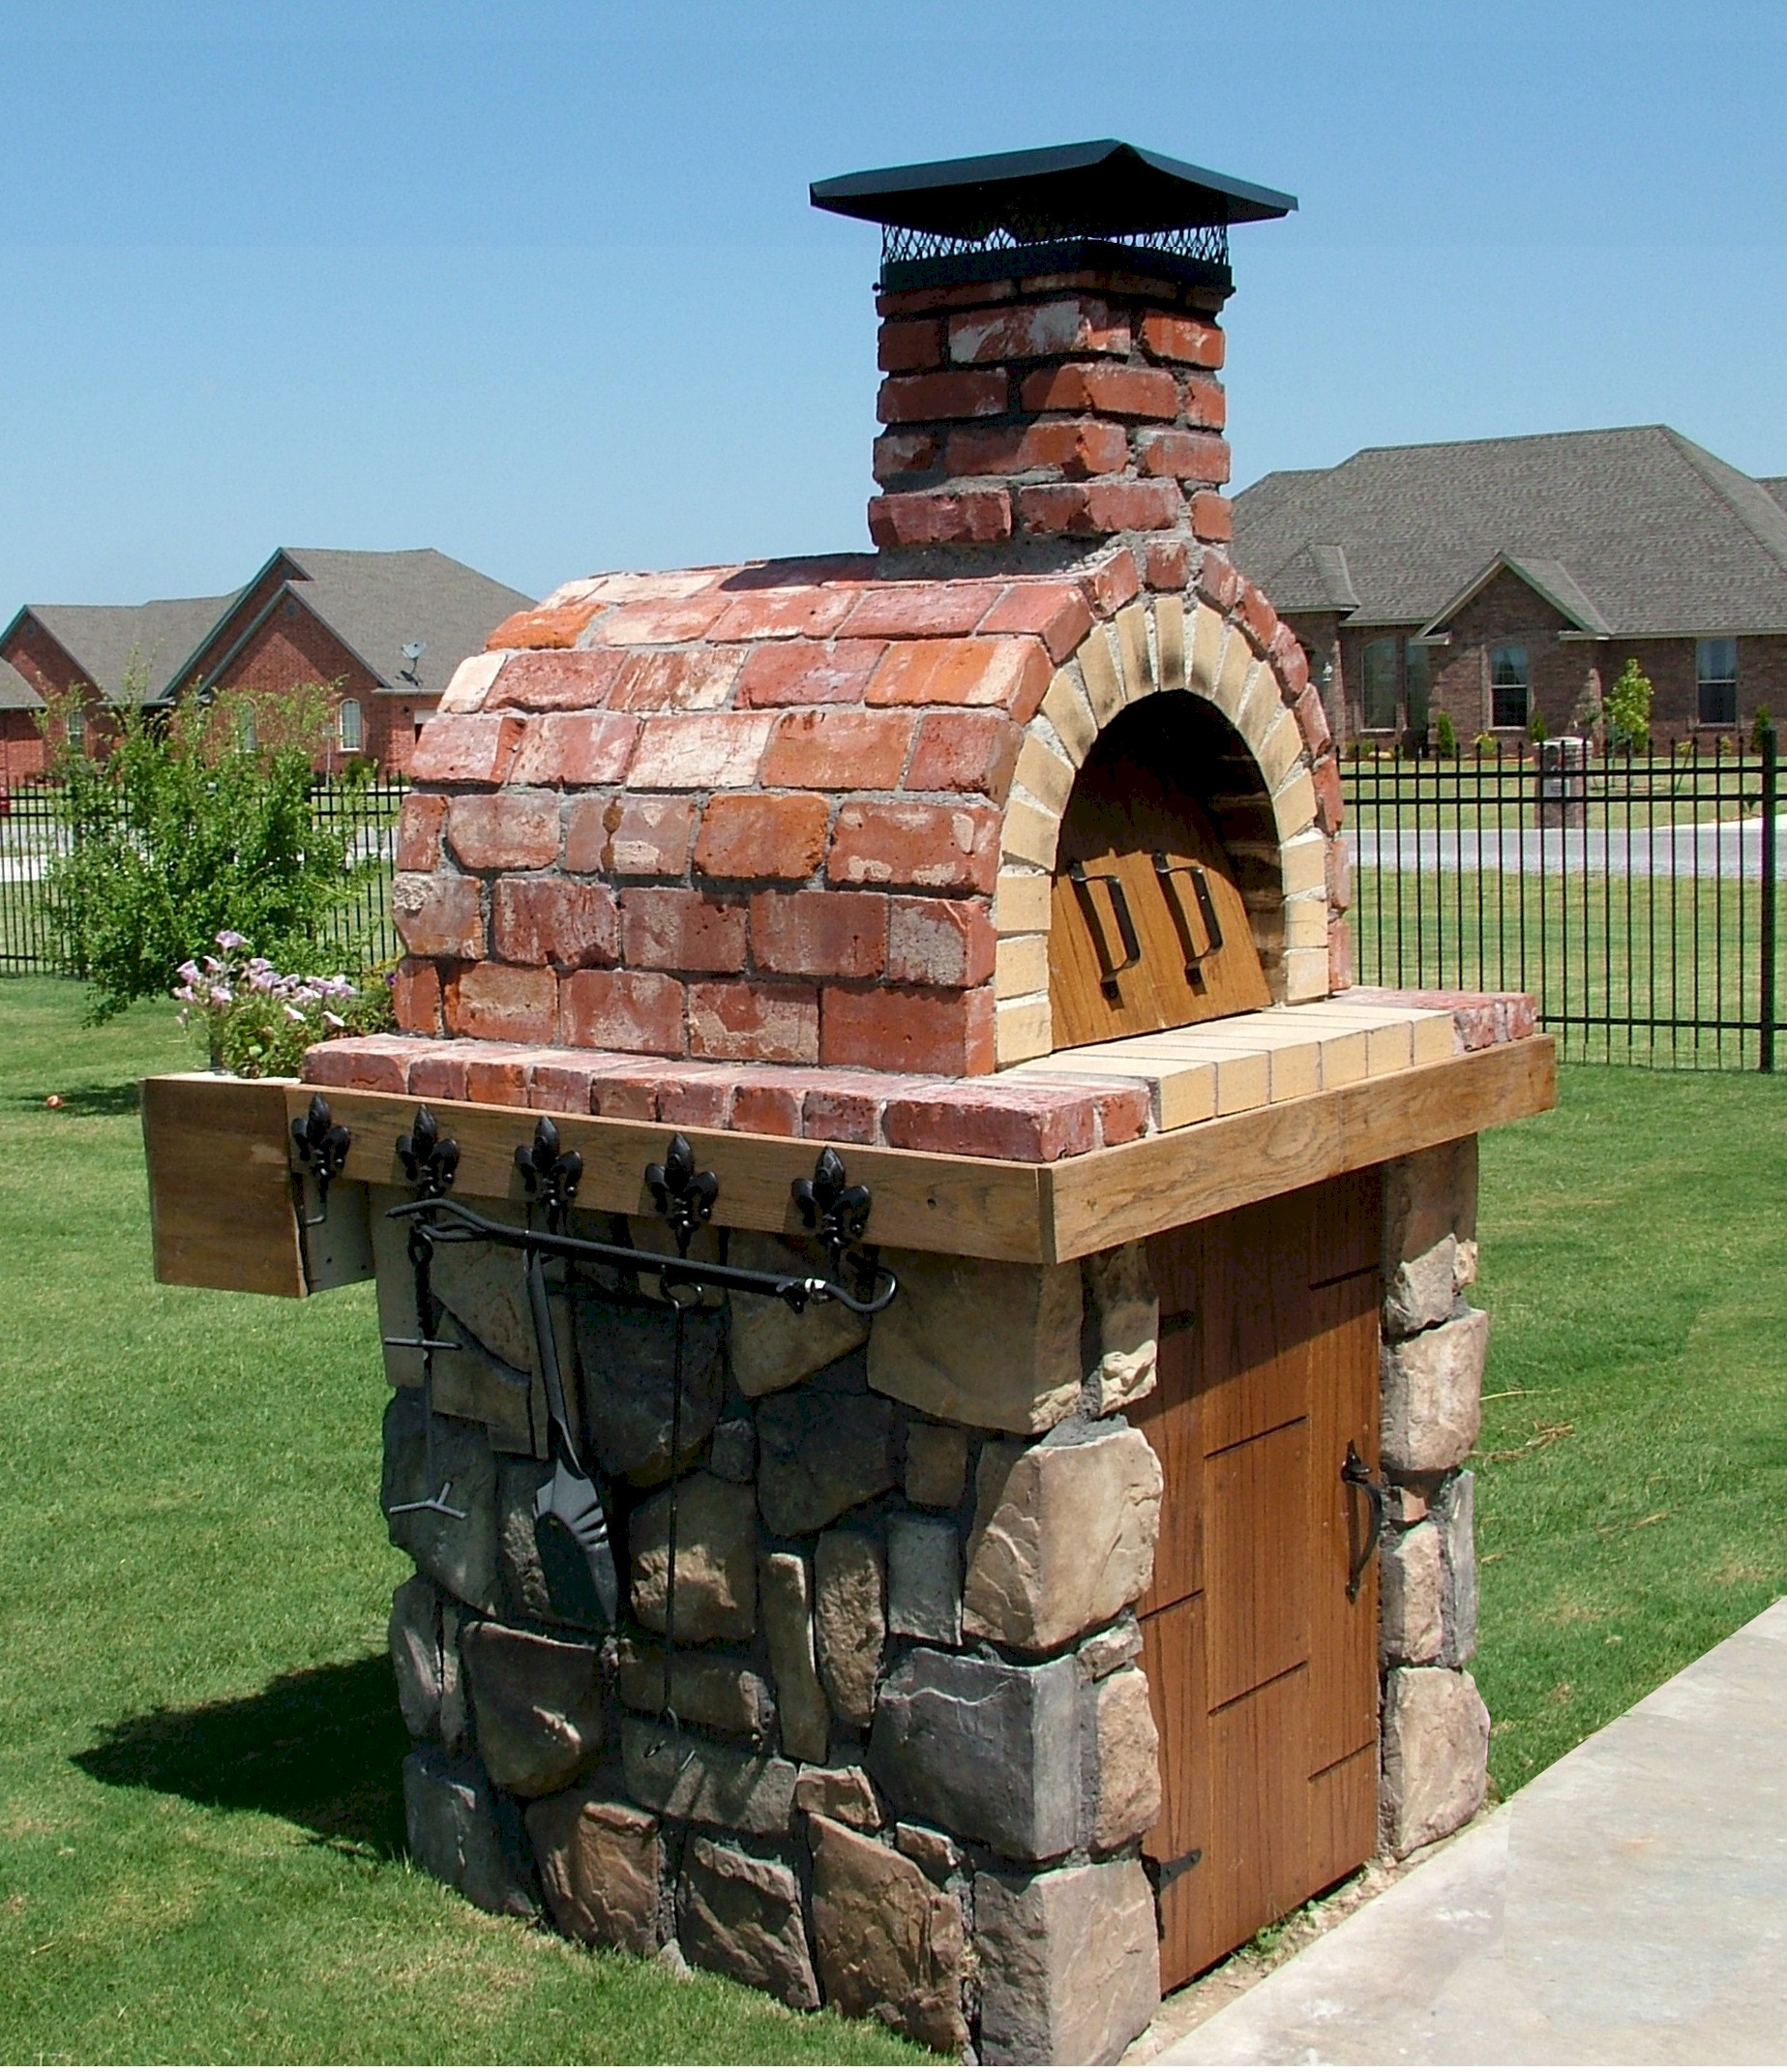 DIY Wood Ovens
 DIY Wood Fired Outdoor Brick Pizza Ovens Are Not ly Easy